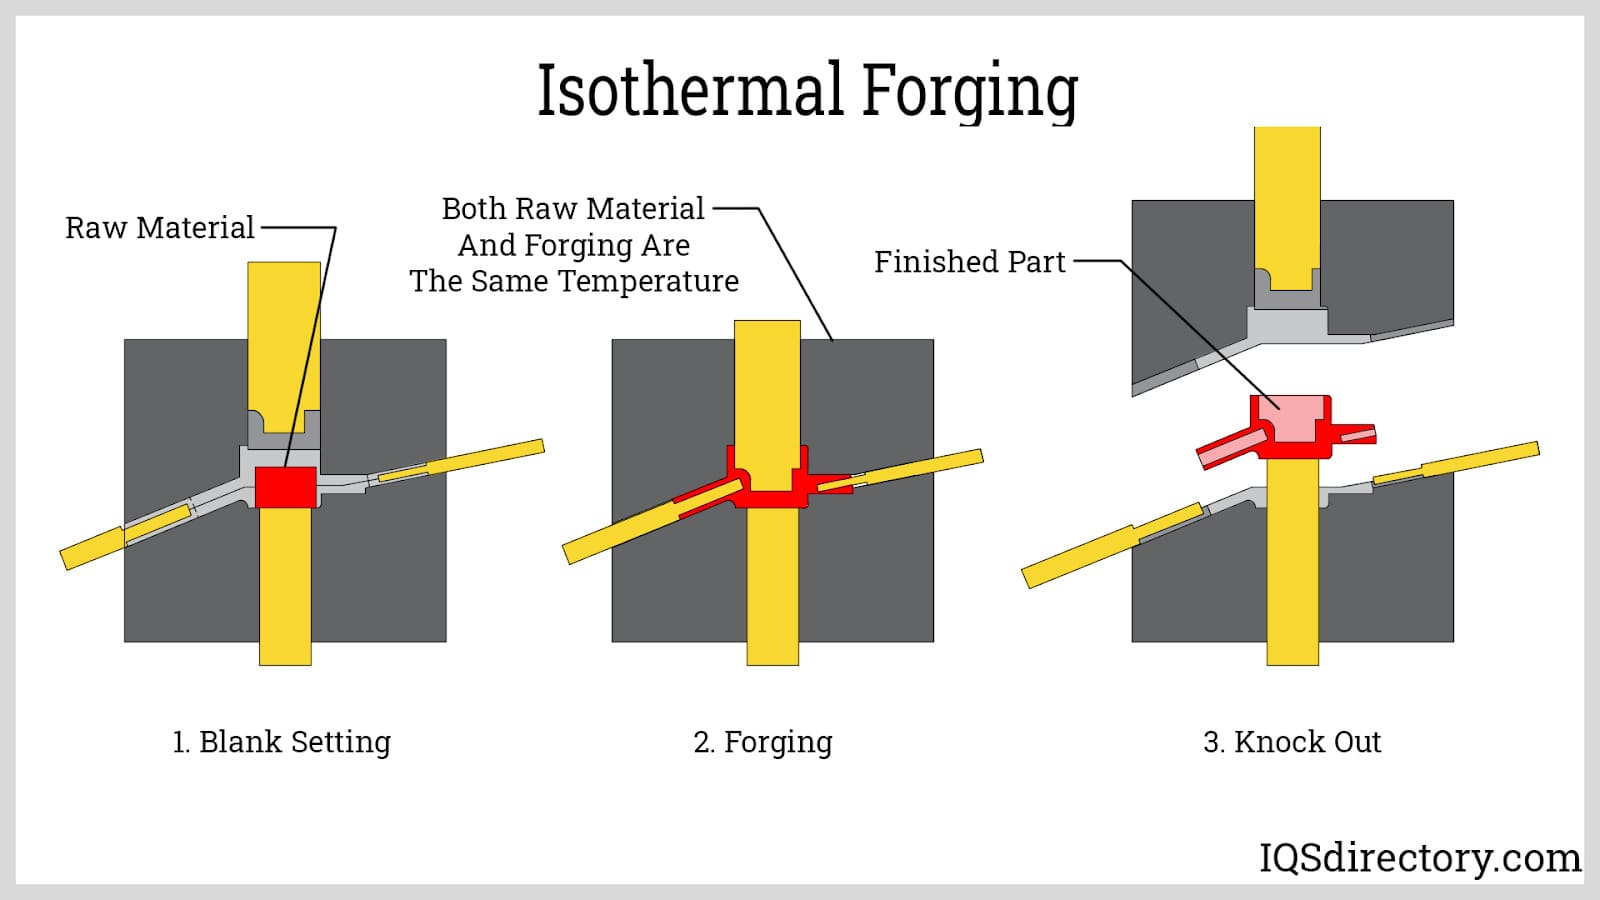 What is the difference between hot die forging and isothermal forging?